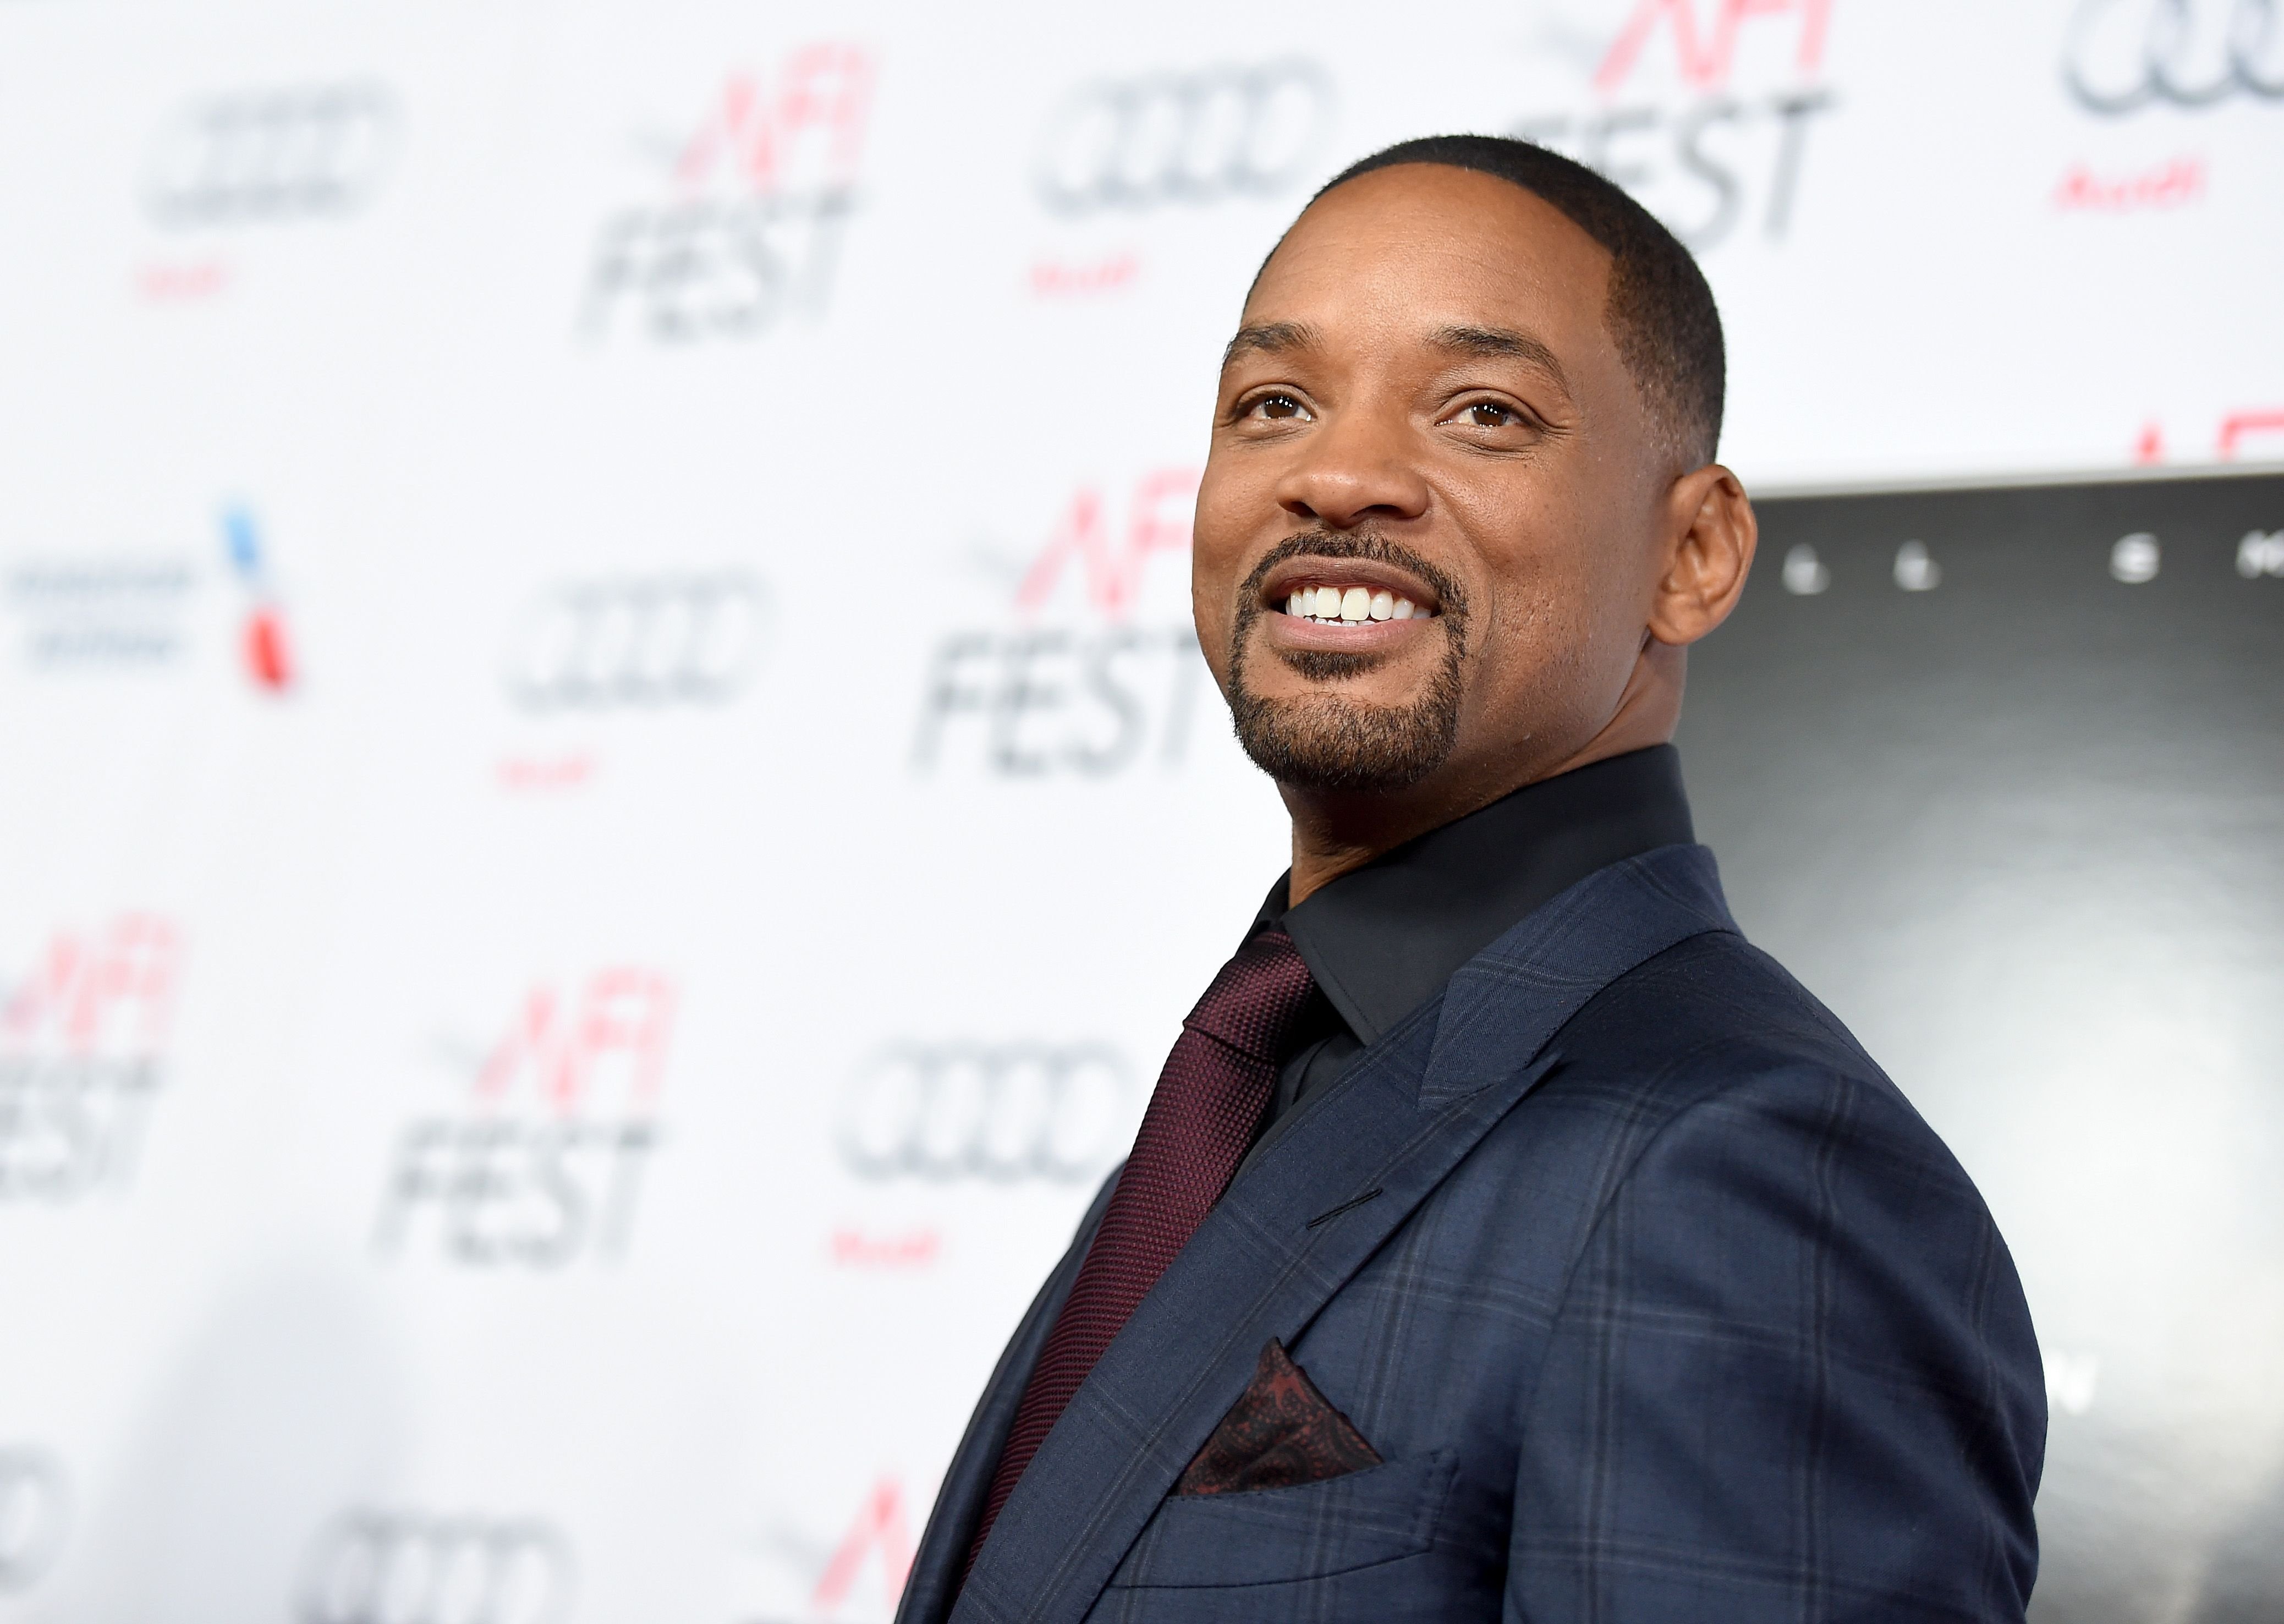 Will Smith at the Premiere of "Concussion" on November 10, 2015 in California | Photo: Getty Images